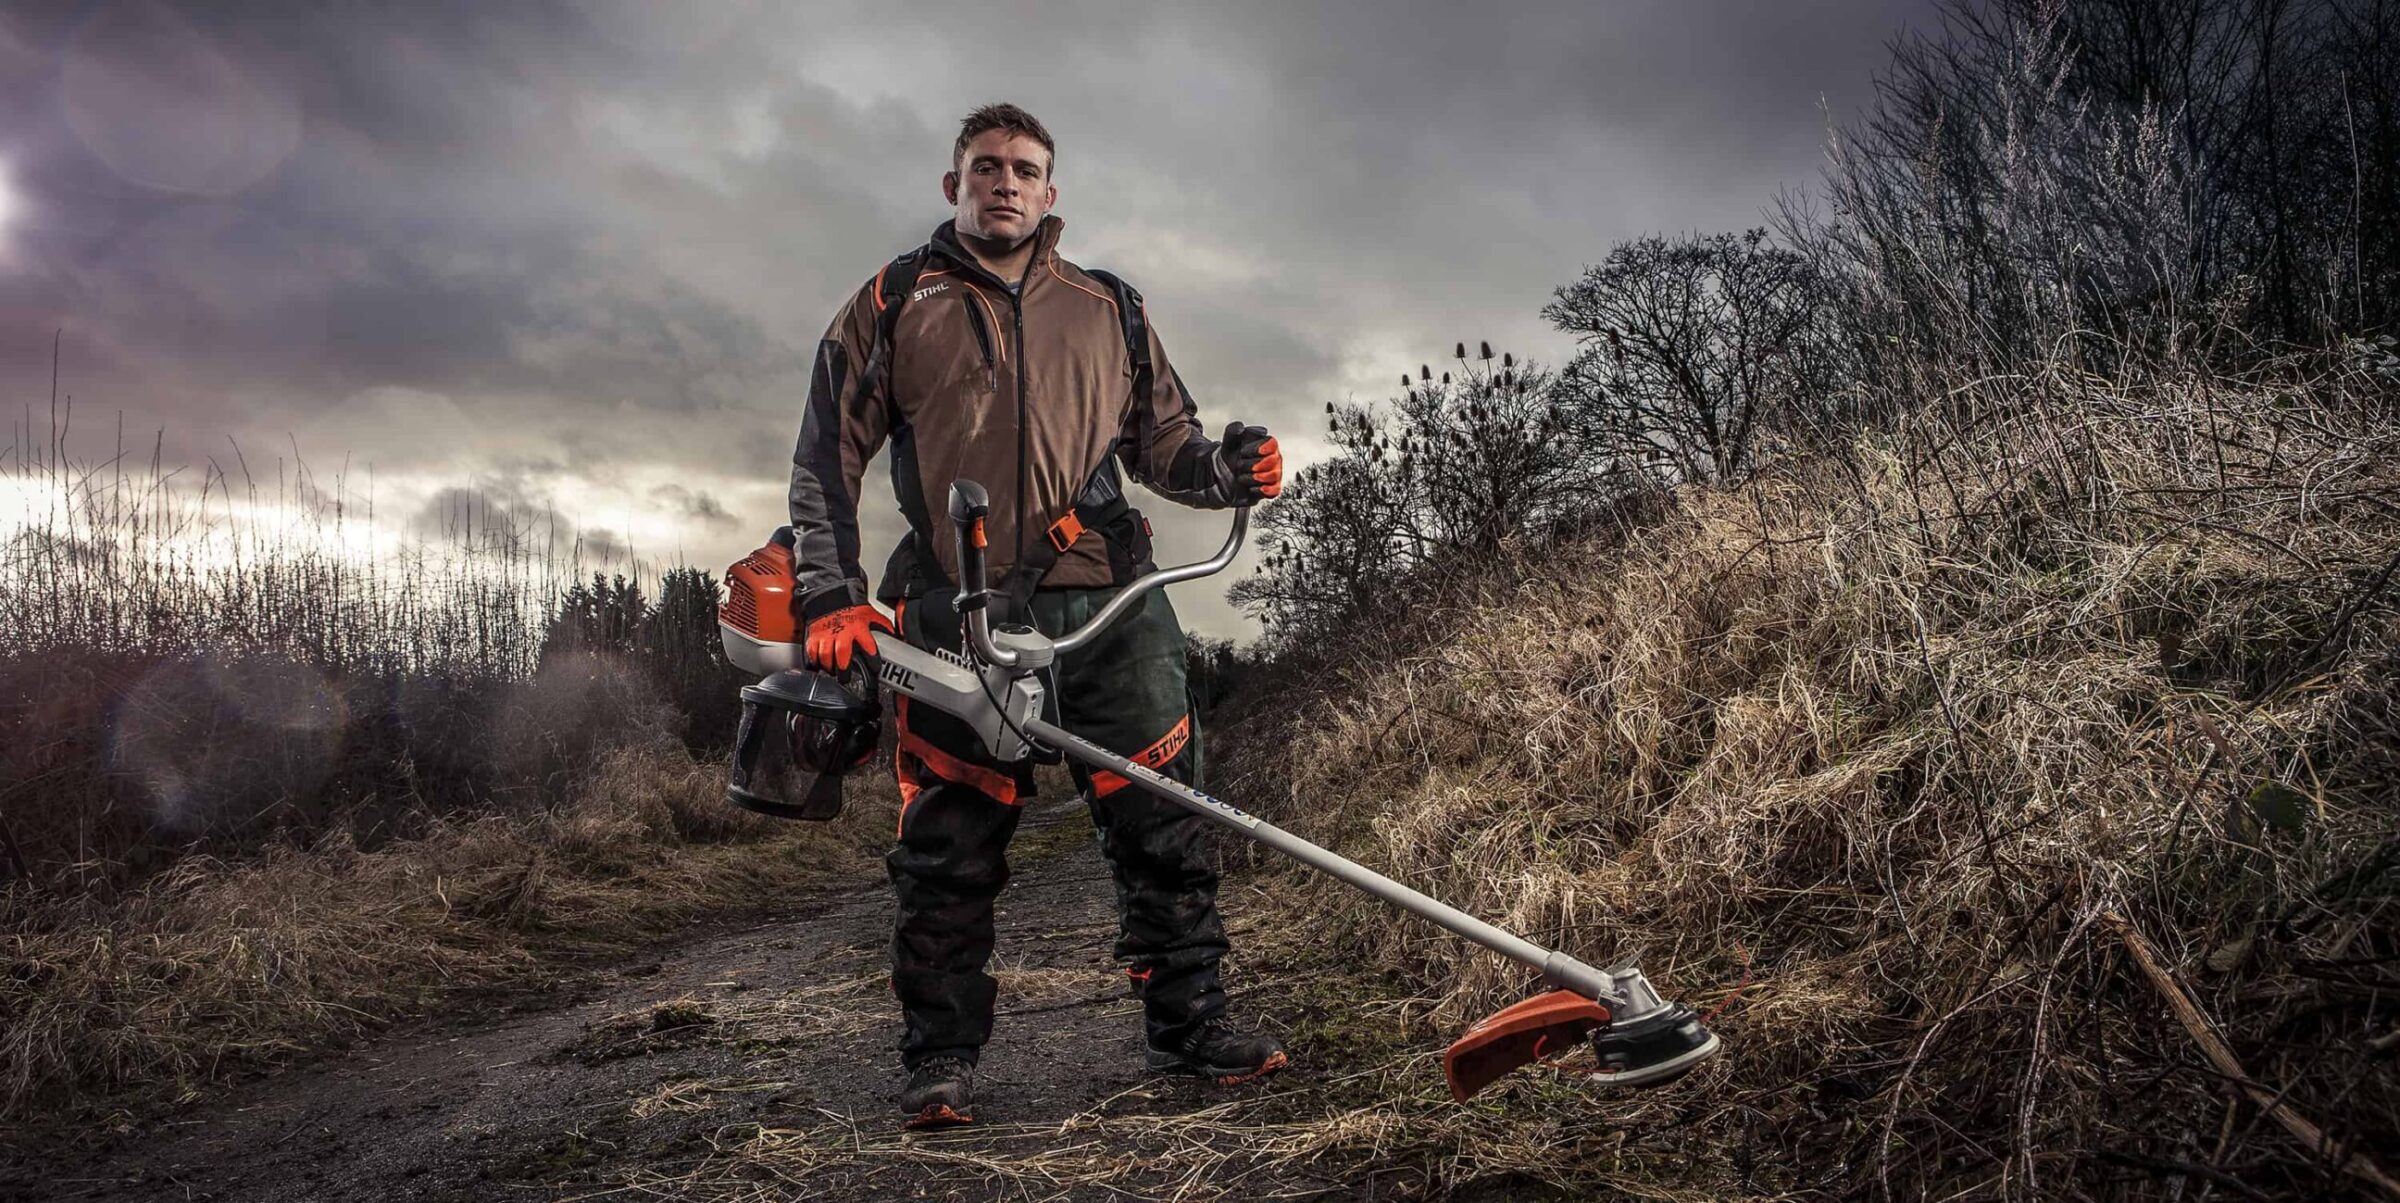 Tom Youngs Leicester Rugby Hooker using Stihl Brushcutter tool with storms, rain and dramatic Sky